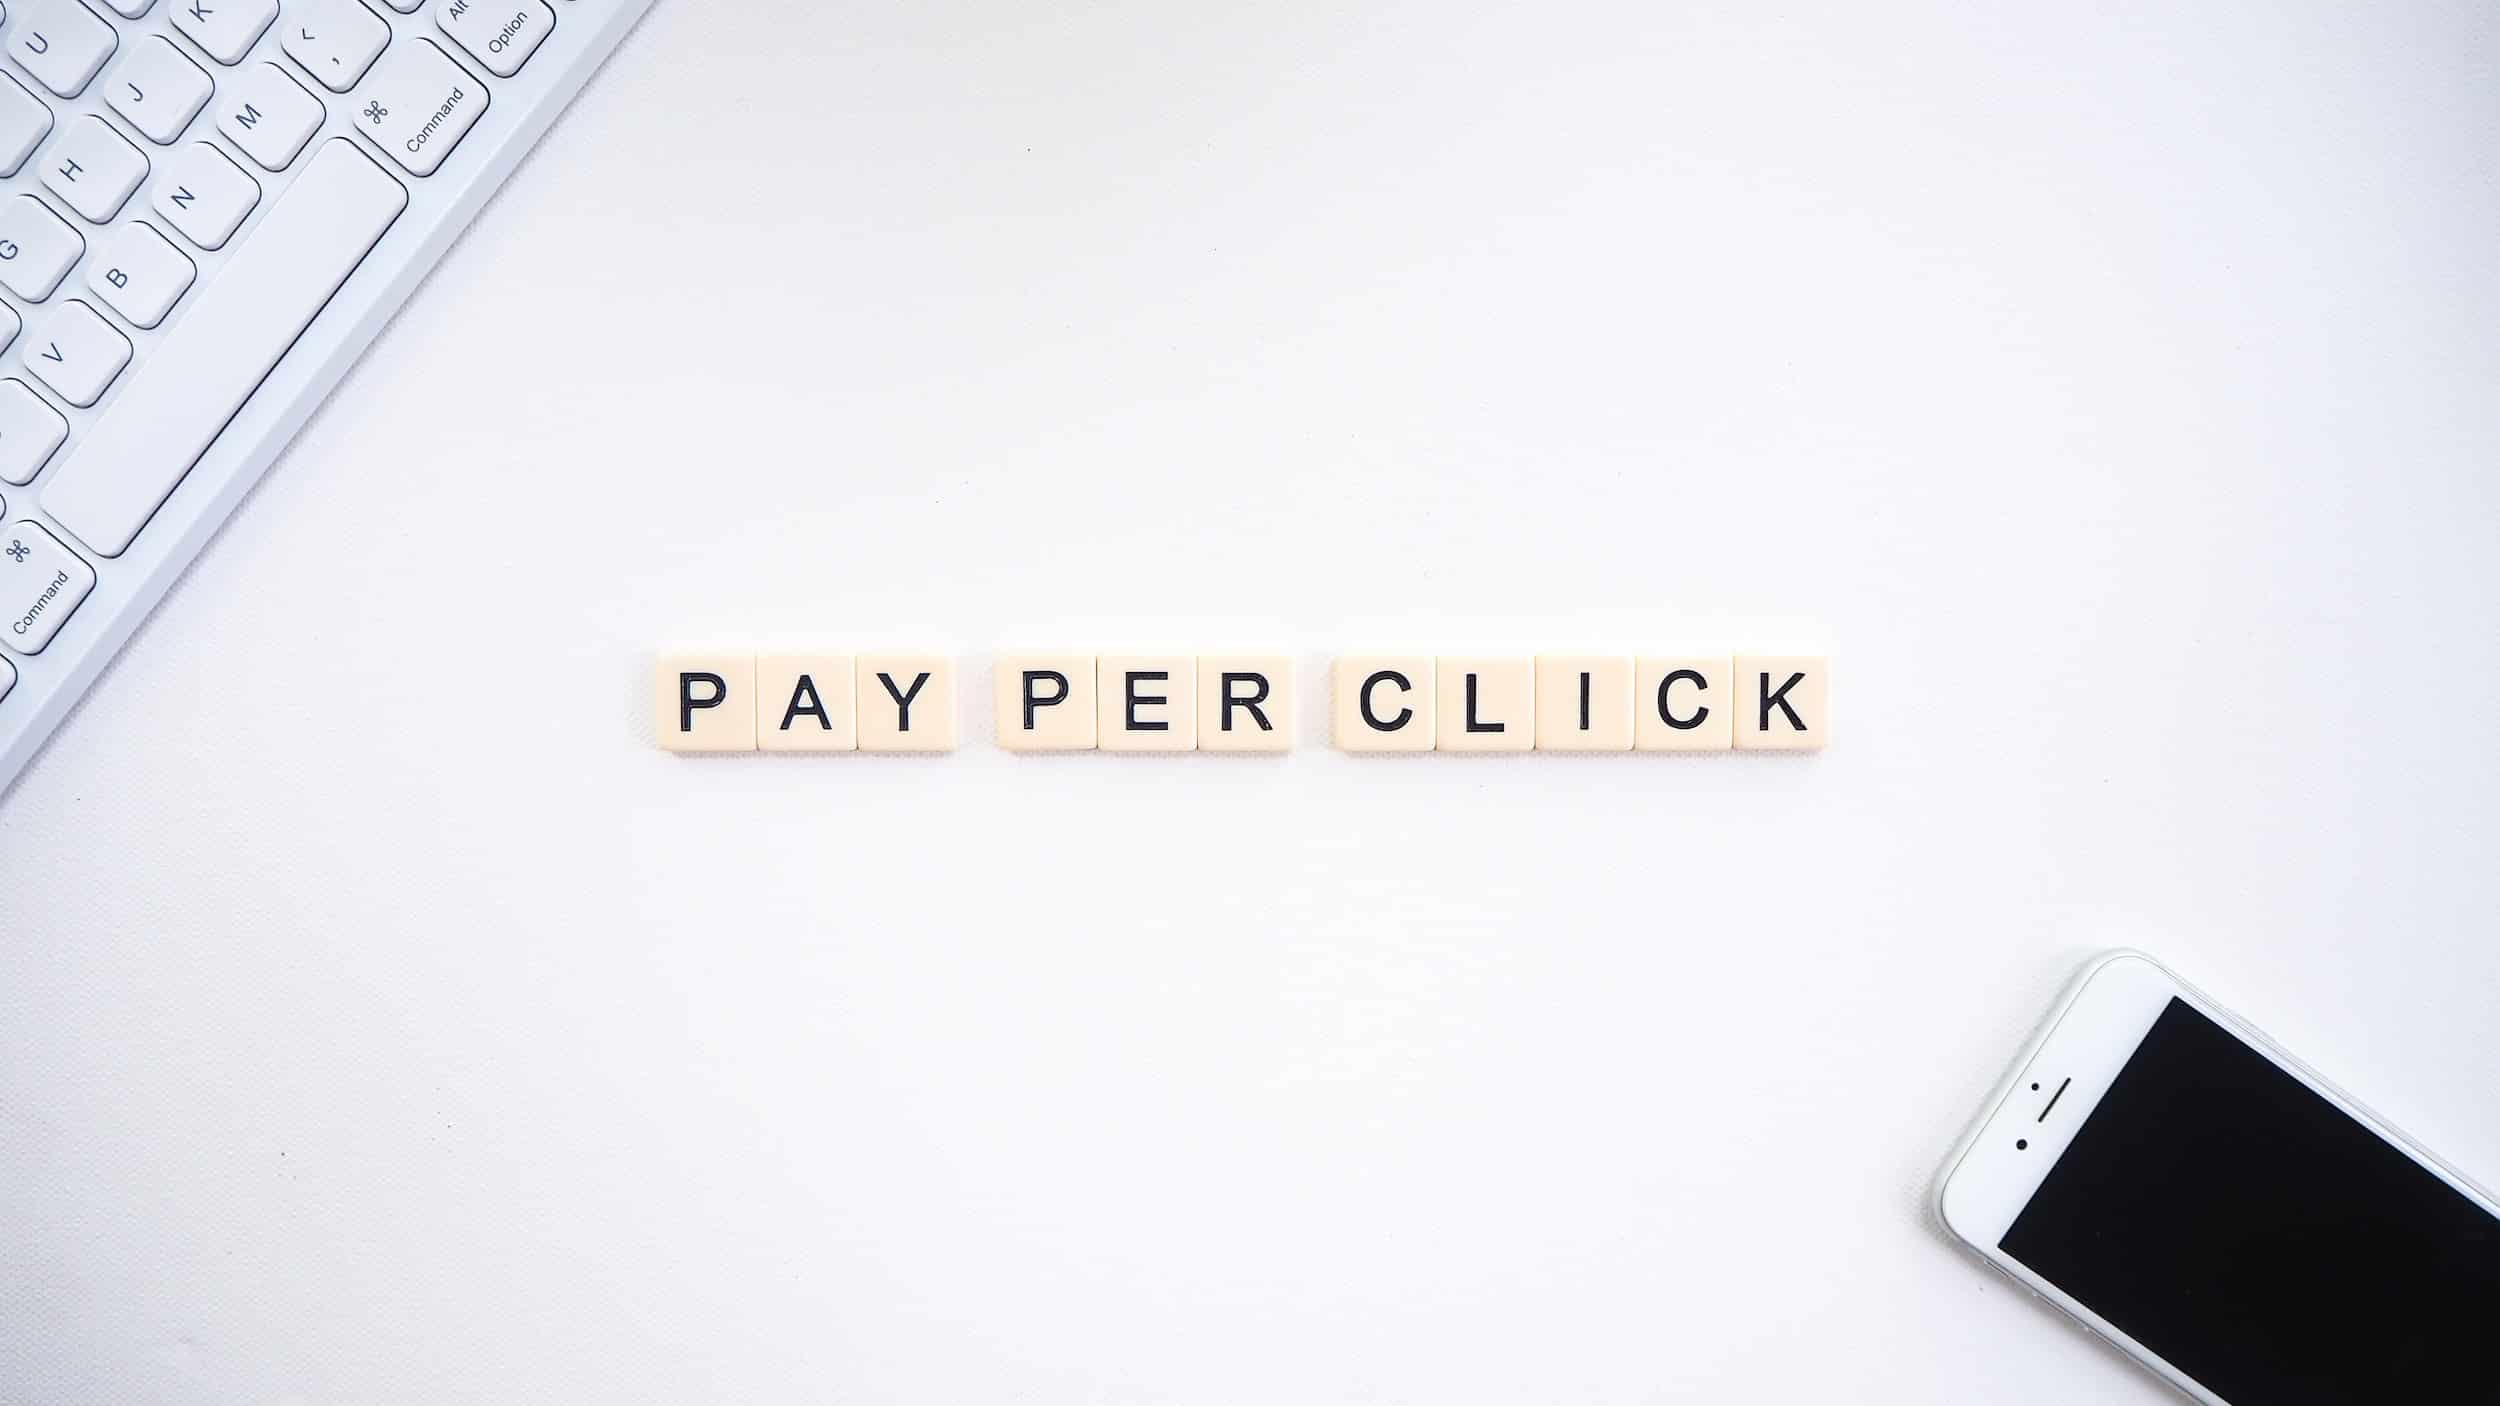 Pay per click (PPC) word tiles with a smartphone and computer keyboard